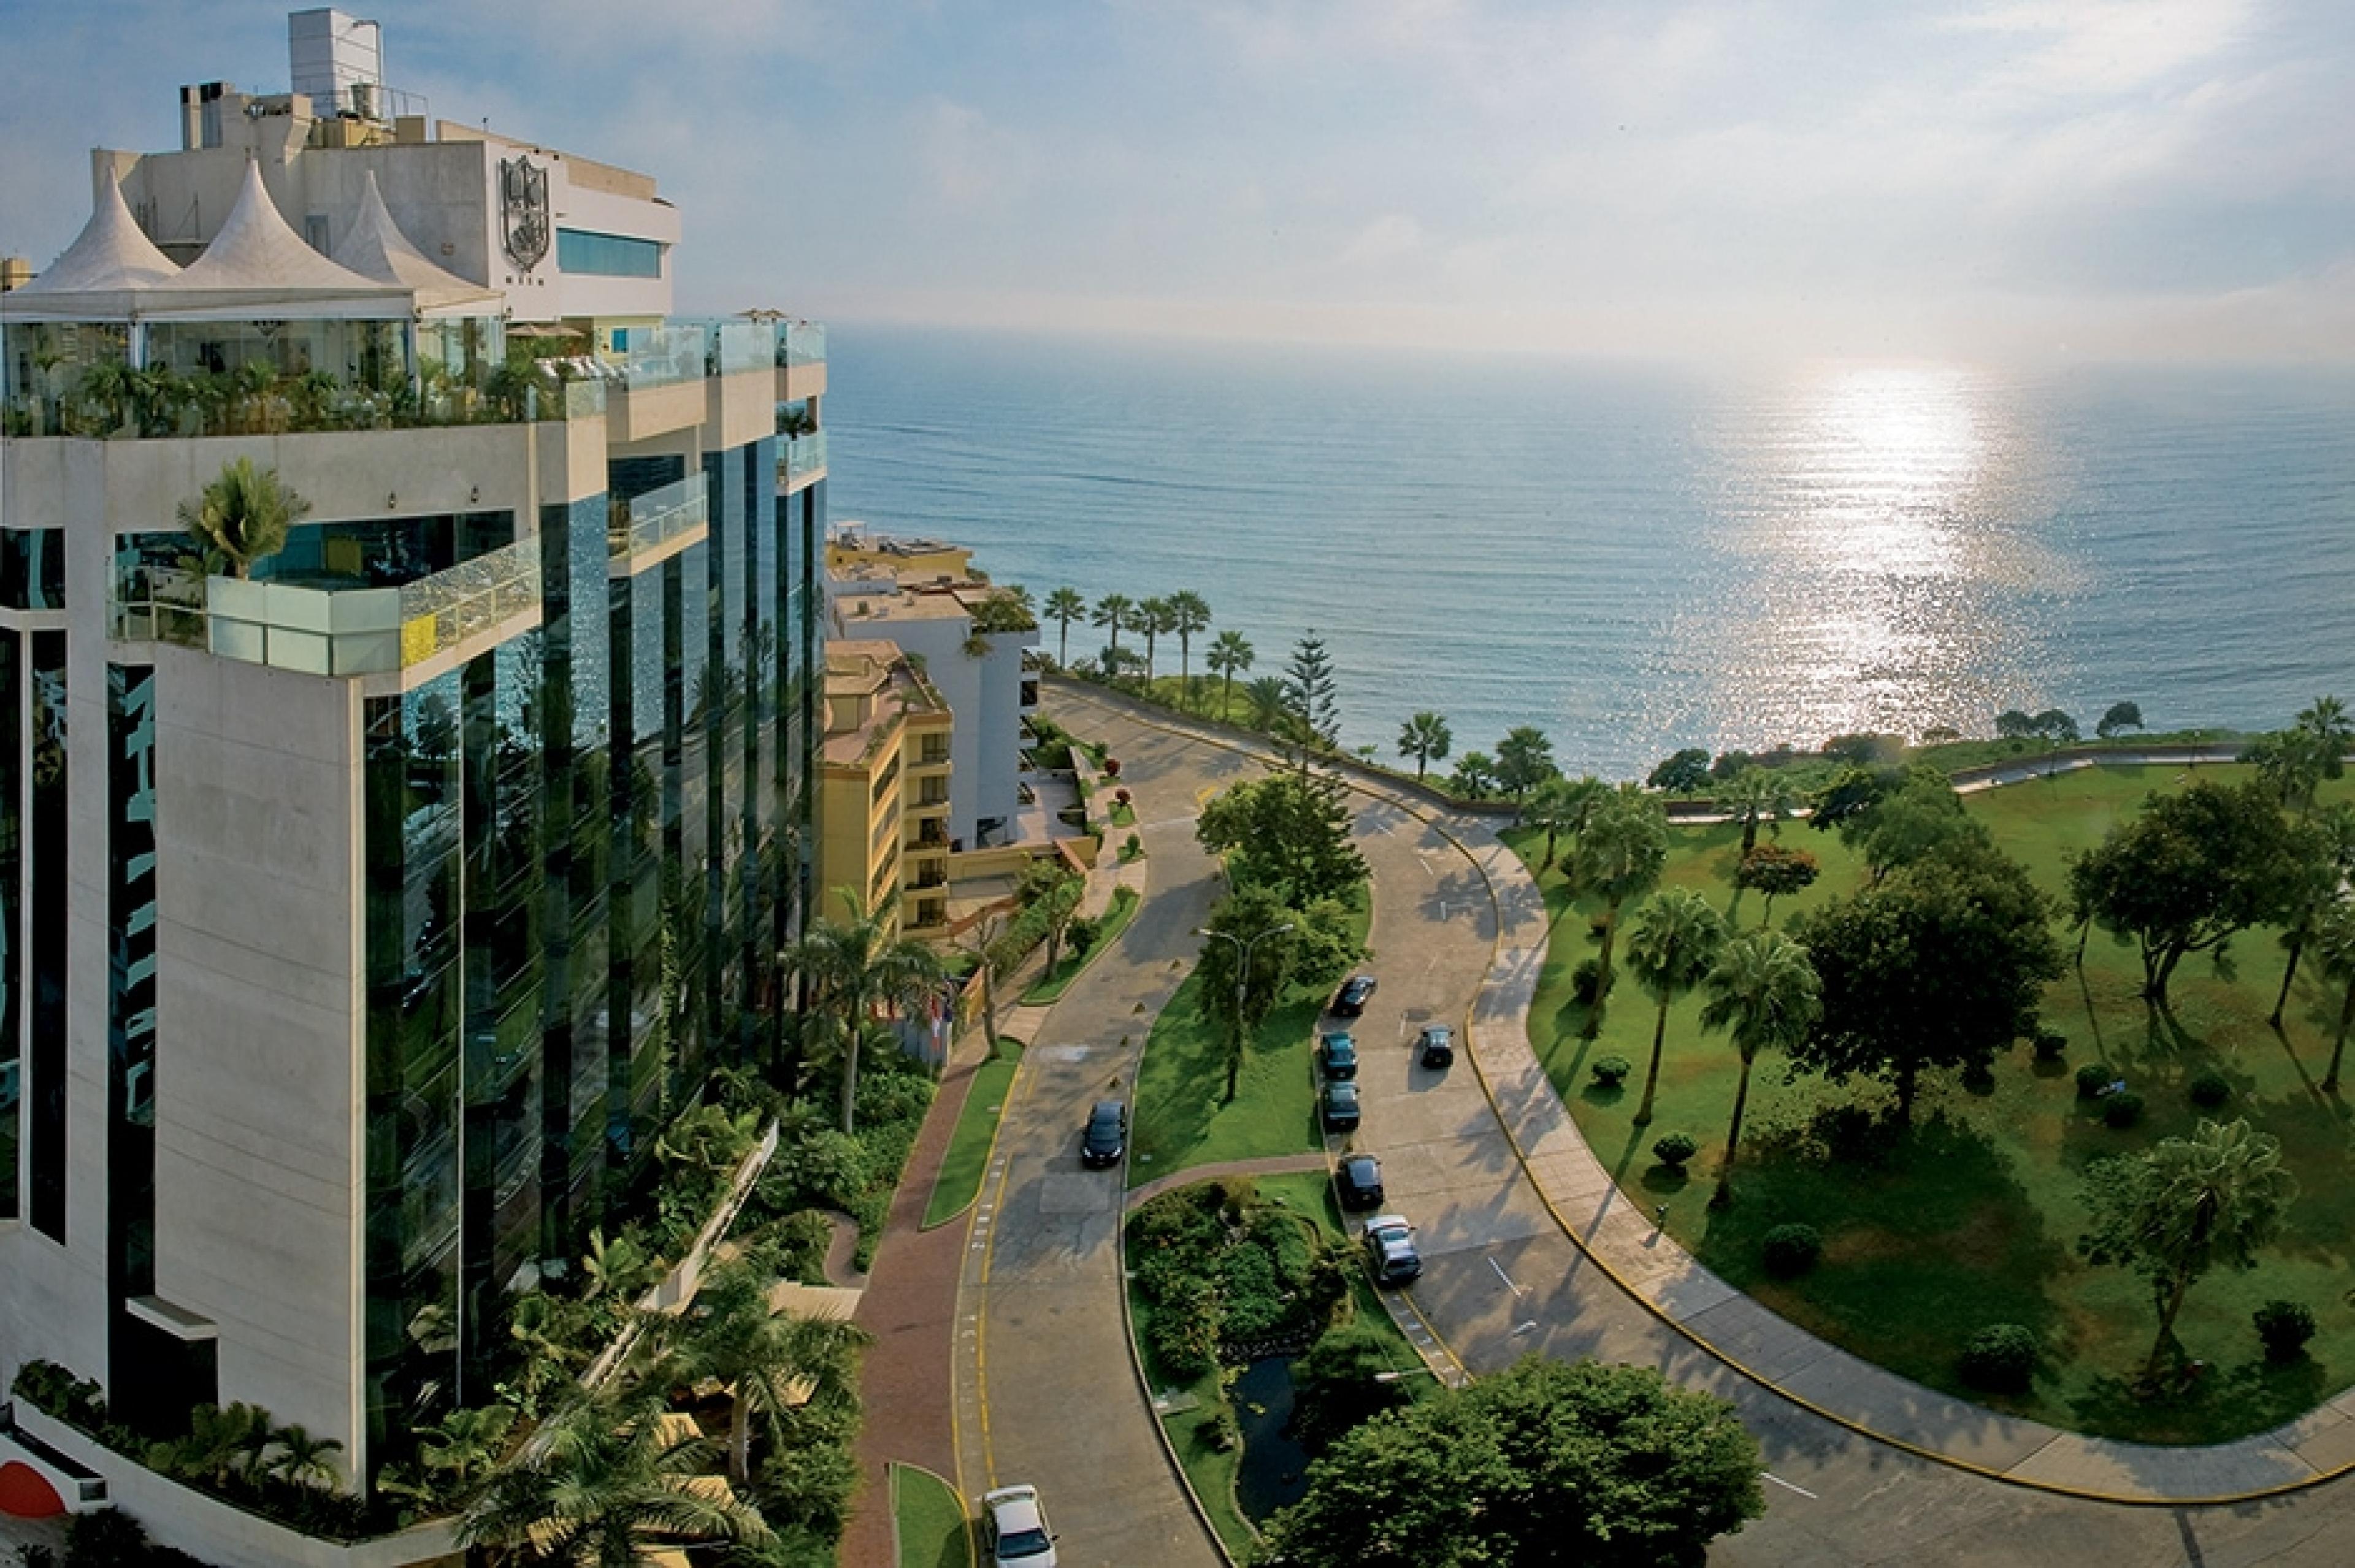 aerial view of hotel exterior. hotel has glass walls and overlooks a park and the ocean